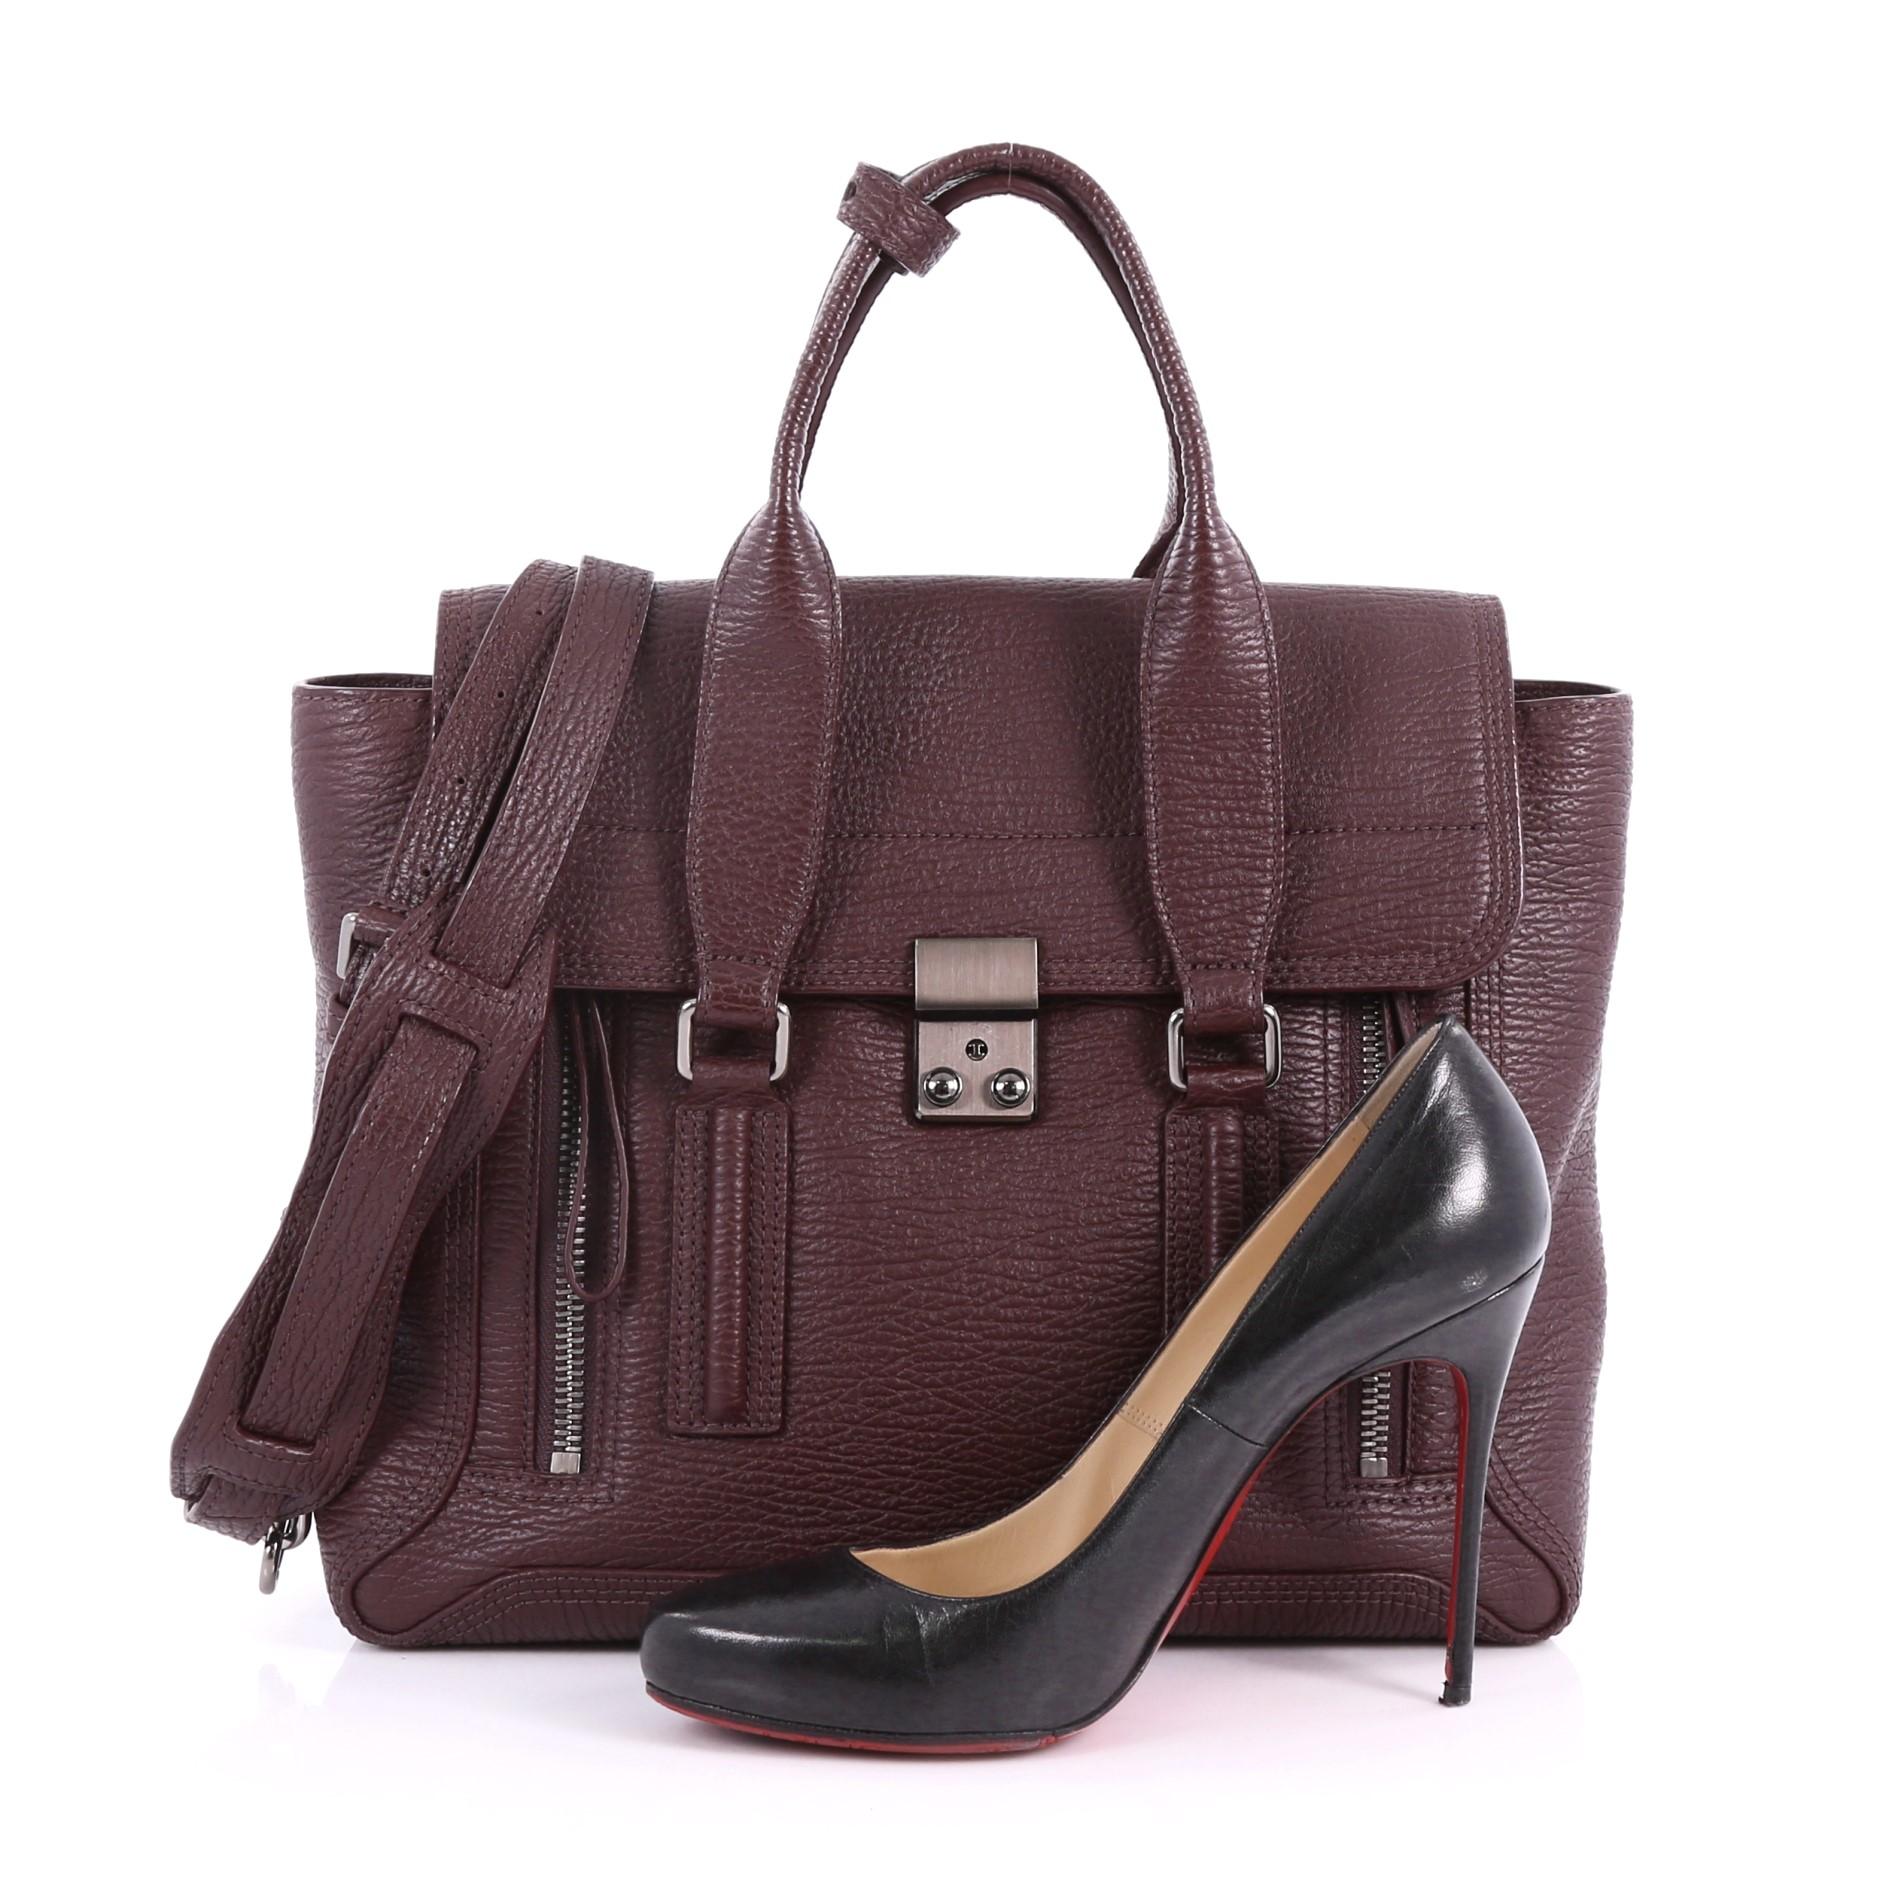 This authentic 3.1 Phillip Lim Pashli Satchel Leather Medium is a practical bag with a stylish edge made for on-the-go moments. Crafted from maroon leather, this chic satchel features dual top handles, expandable zip sides, top flap push-lock